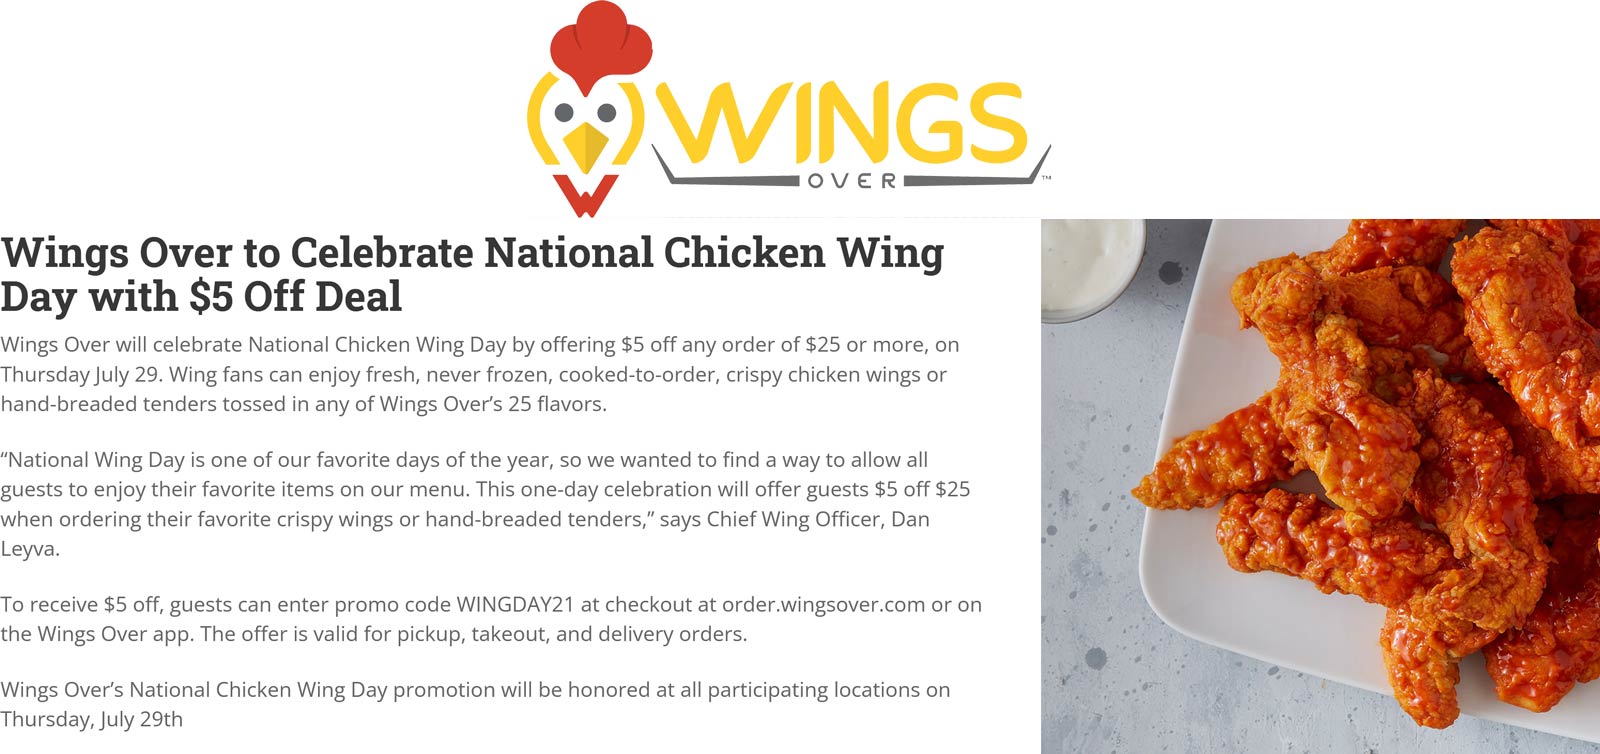 Wings Over restaurants Coupon  $5 off $25 Thursday at Wings Over restaurants via promo code WINGDAY21 #wingsover 